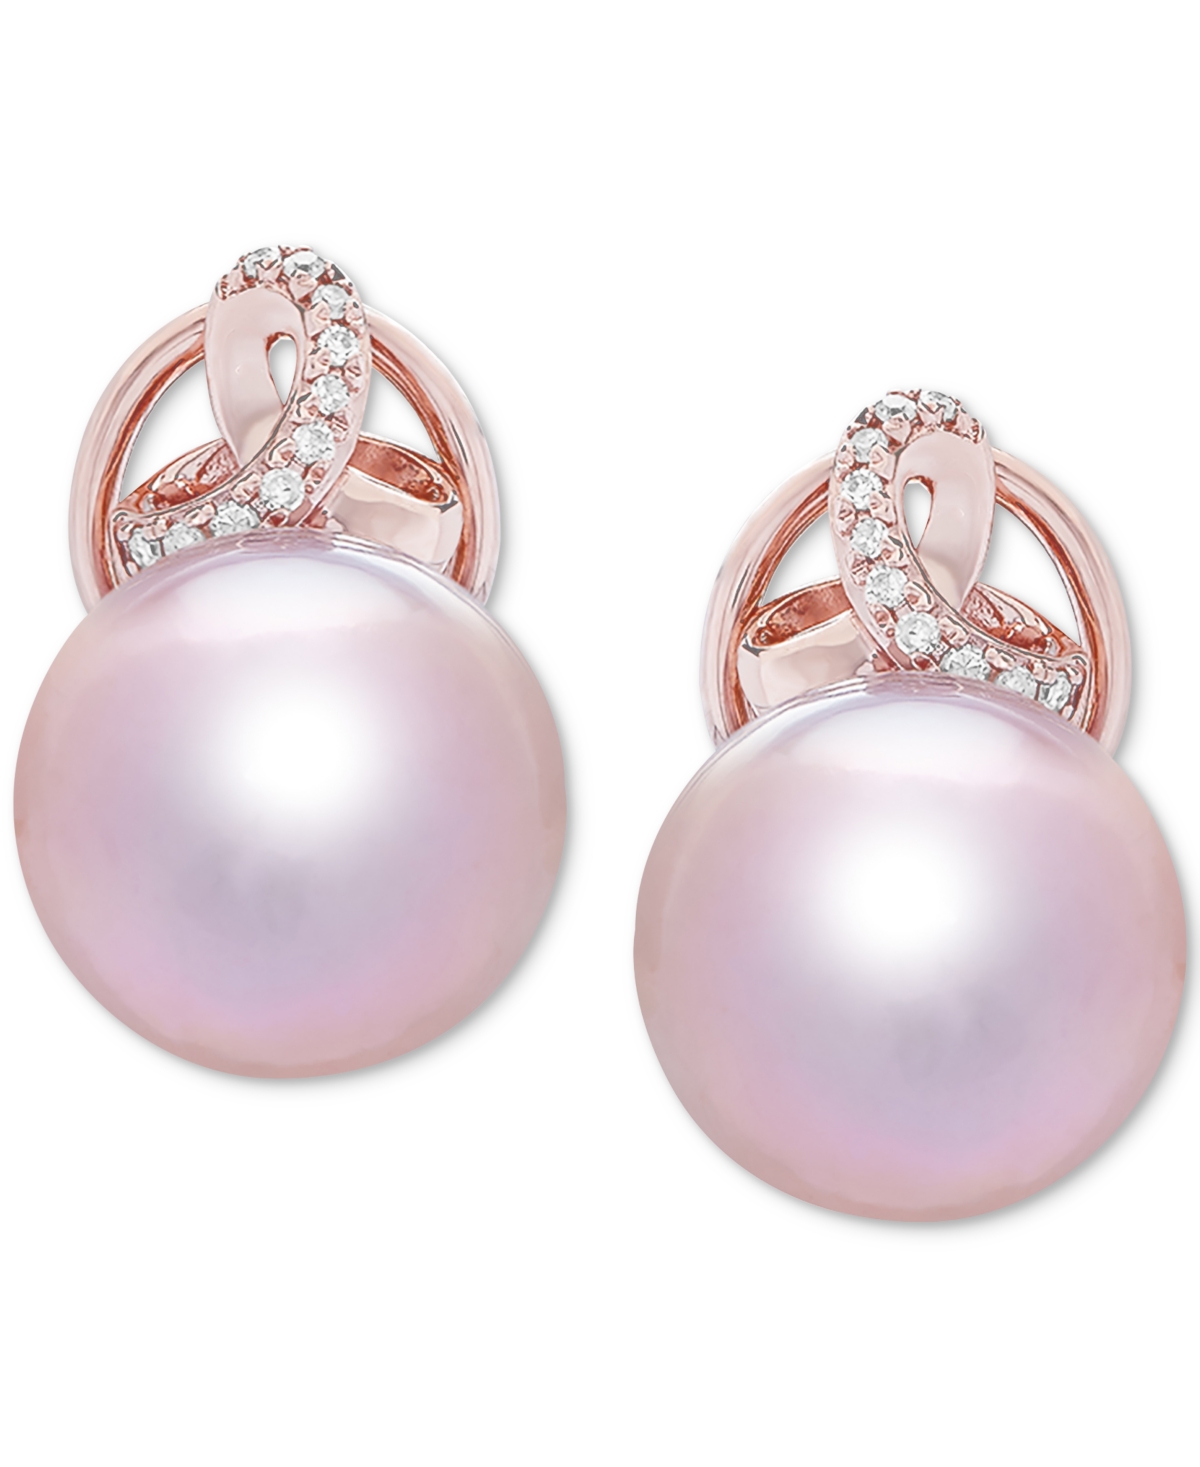 Cultured Ming Pearl (12mm) & Diamond (1/10 ct. t.w.) Stud Earrings in 14k Rose Gold - Rose Gold